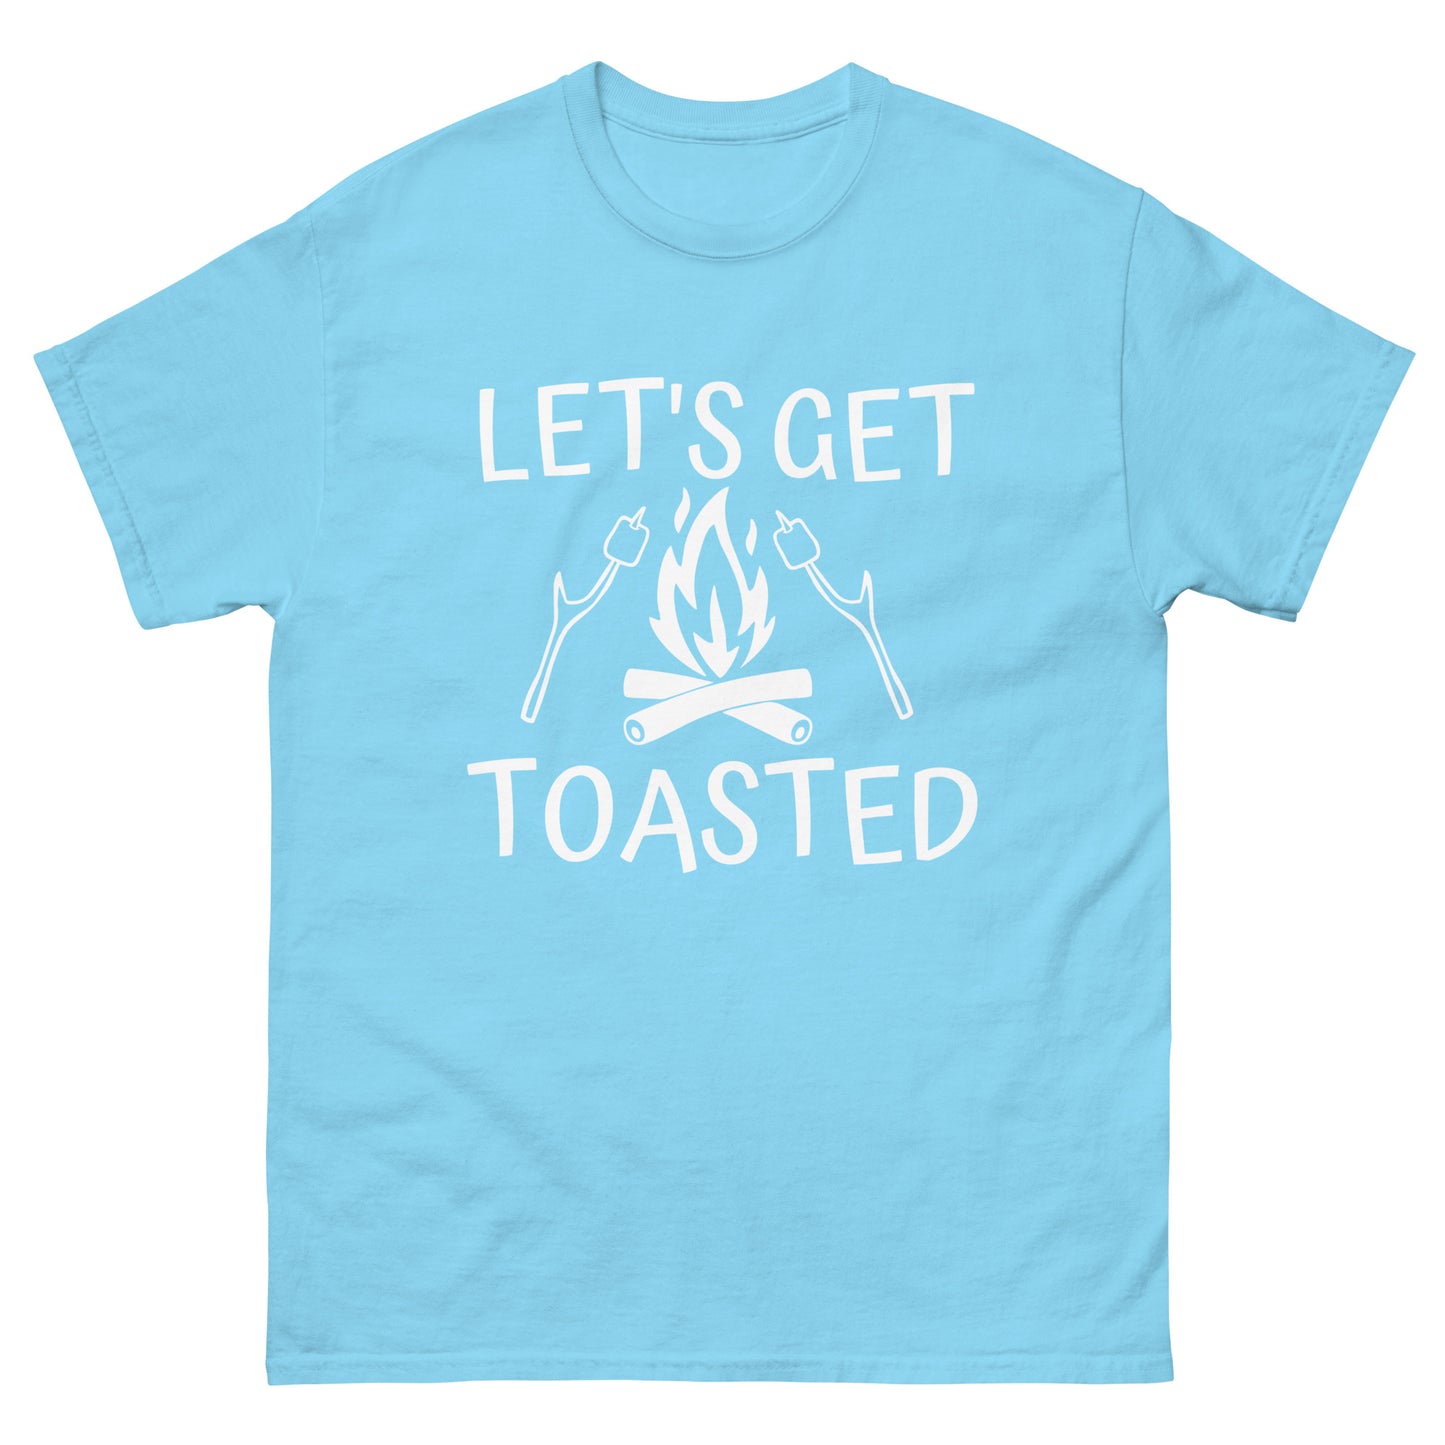 lets get toasted - classic tee